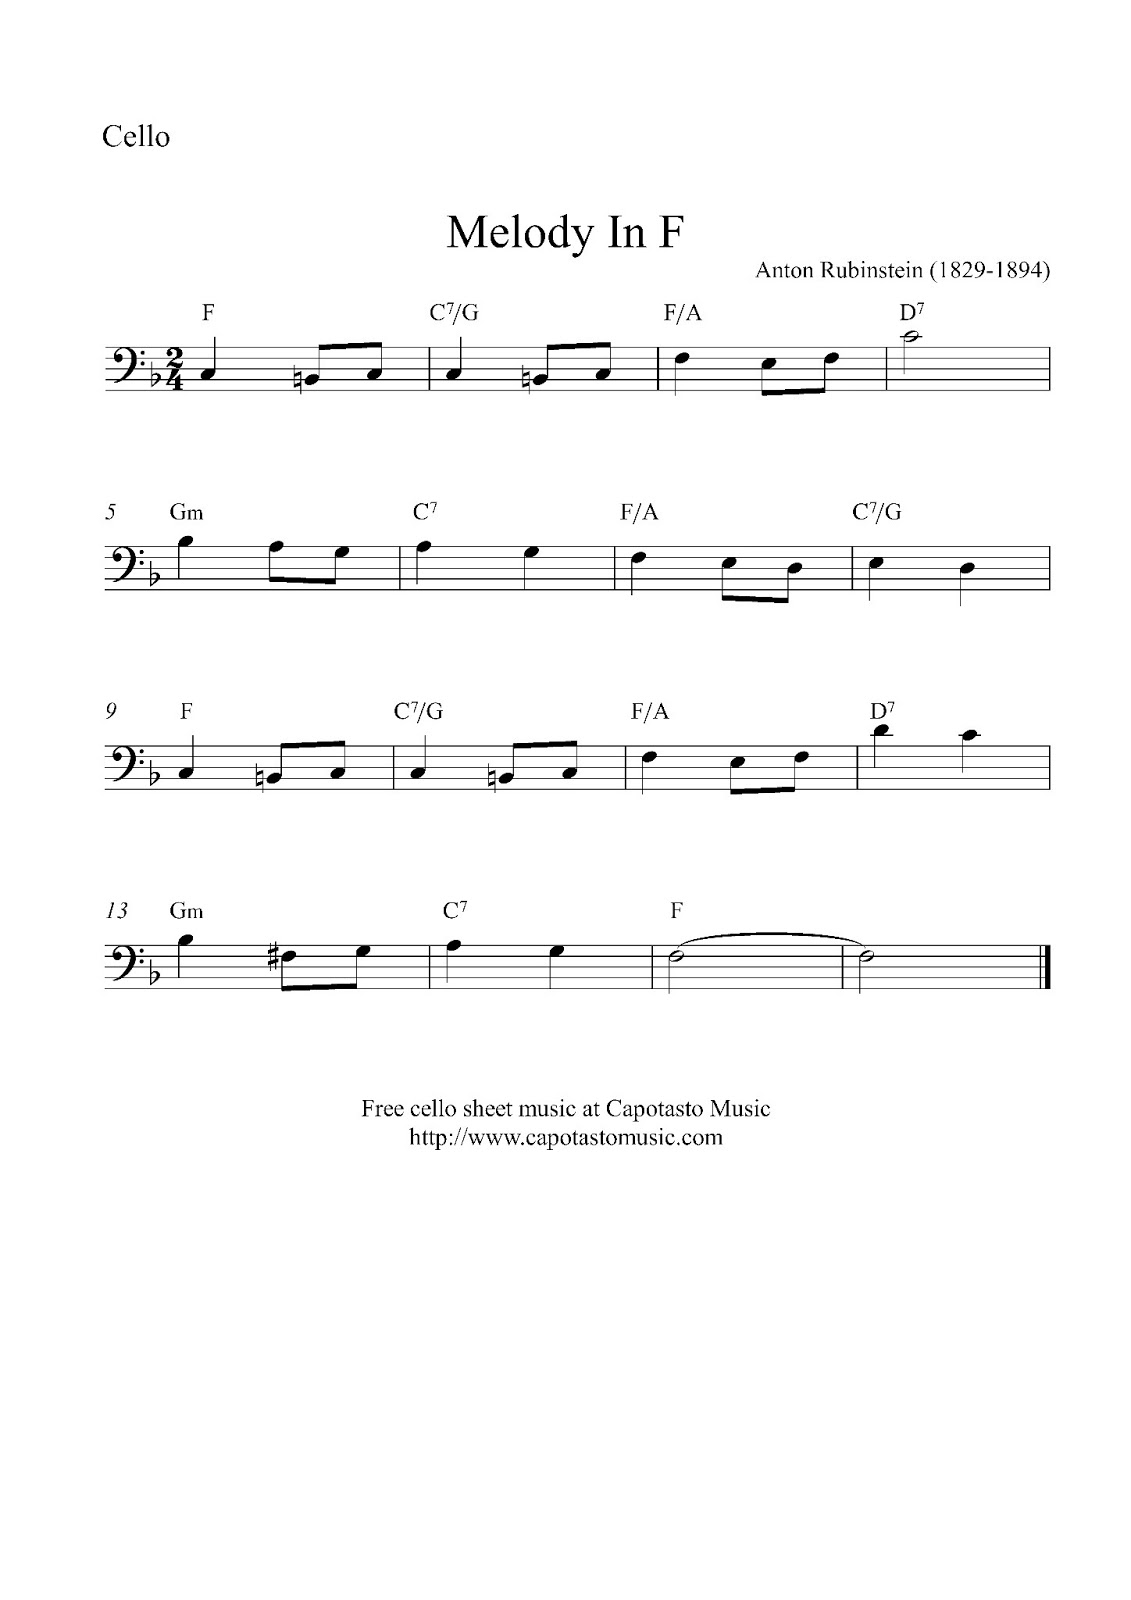 Free easy cello sheet music, Melody In F (simplified and shortened version)